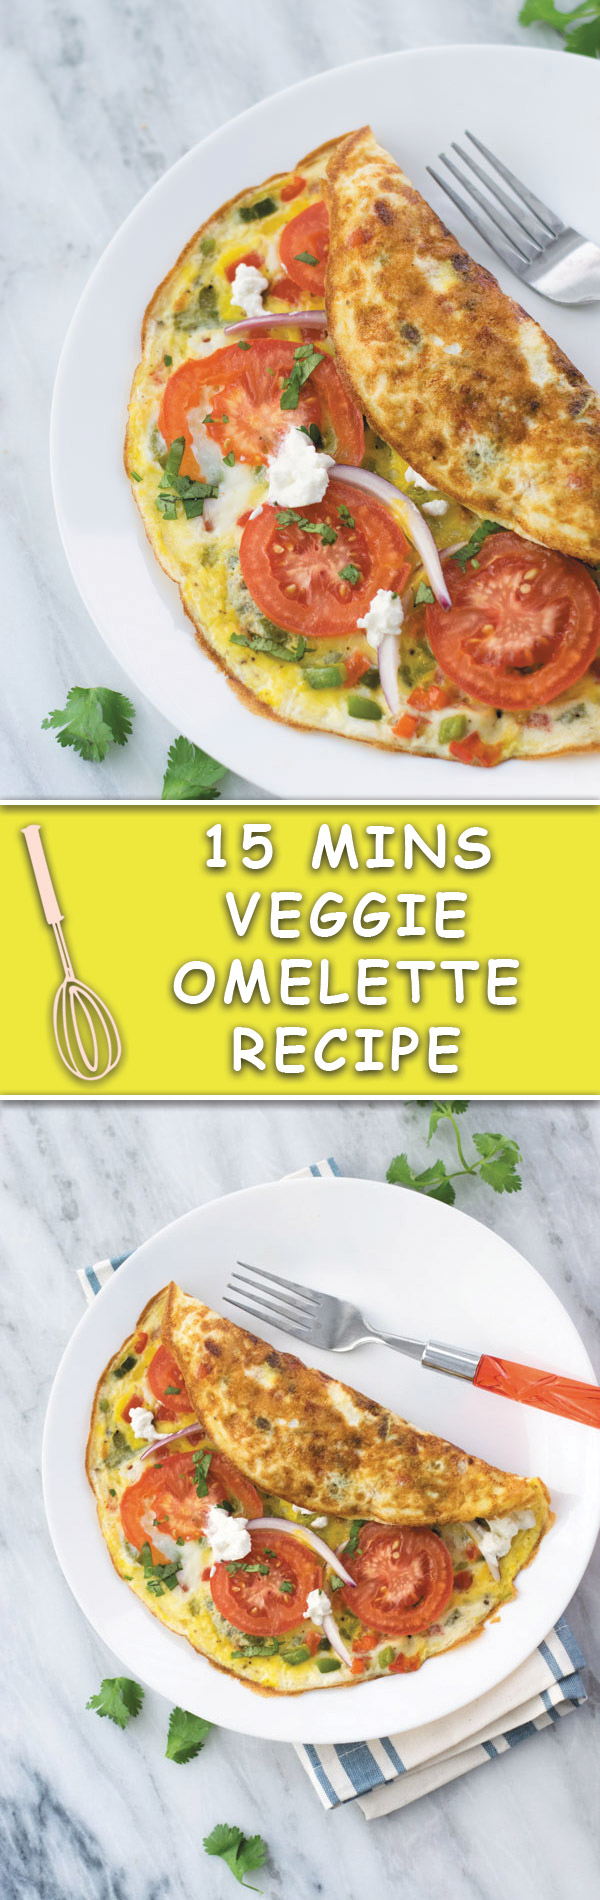 15 mins Veggie Omelette Recipe - a simple out of fridge meal, perfect for breakfast/lunch or dinner. This is one meal I cook when in no mood of cooking! An easy, filling & healthy omelette.